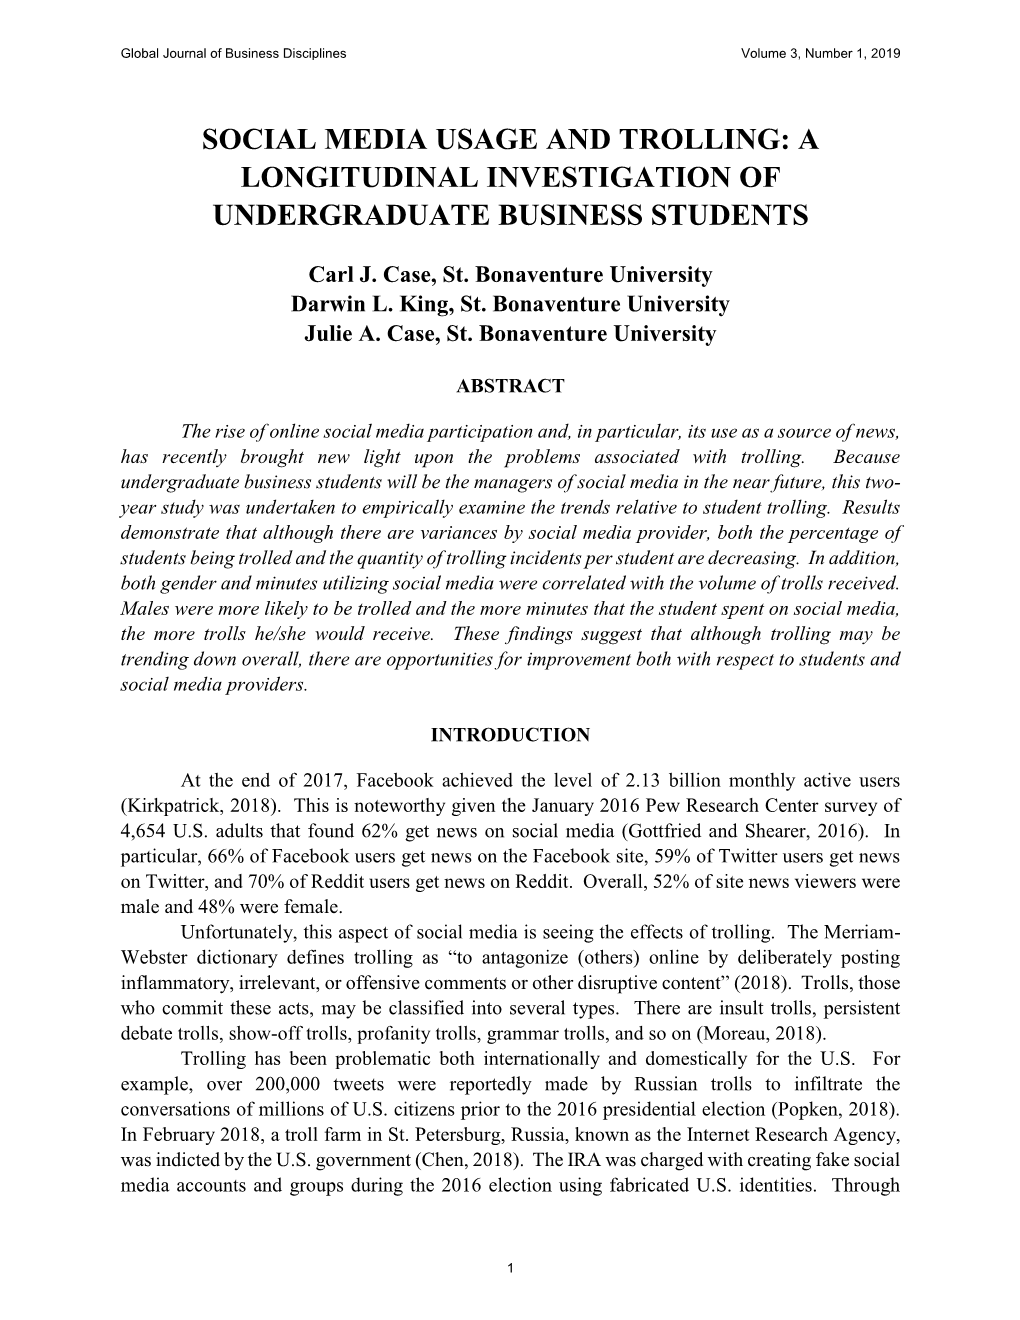 Social Media Usage and Trolling: a Longitudinal Investigation of Undergraduate Business Students